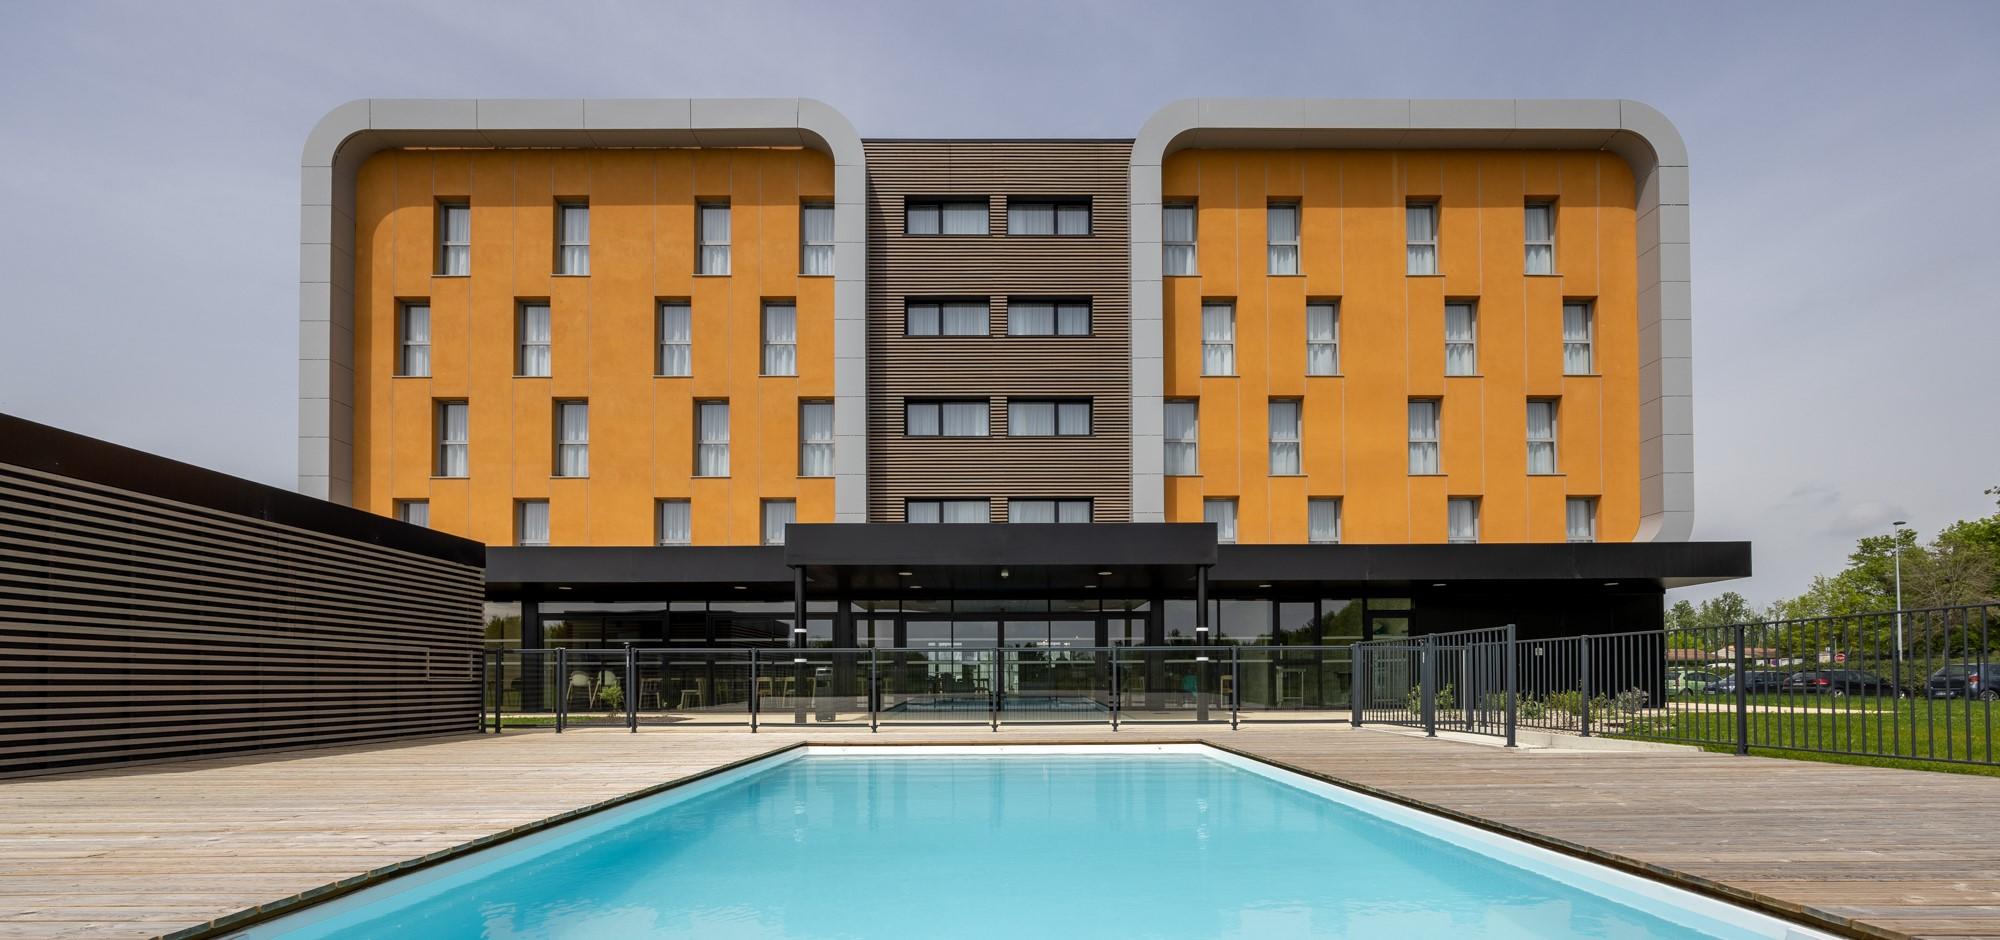 Le Relais des Deux Mers | 3 star hotel Marmande | hotel with terrace | Heated outdoor pool